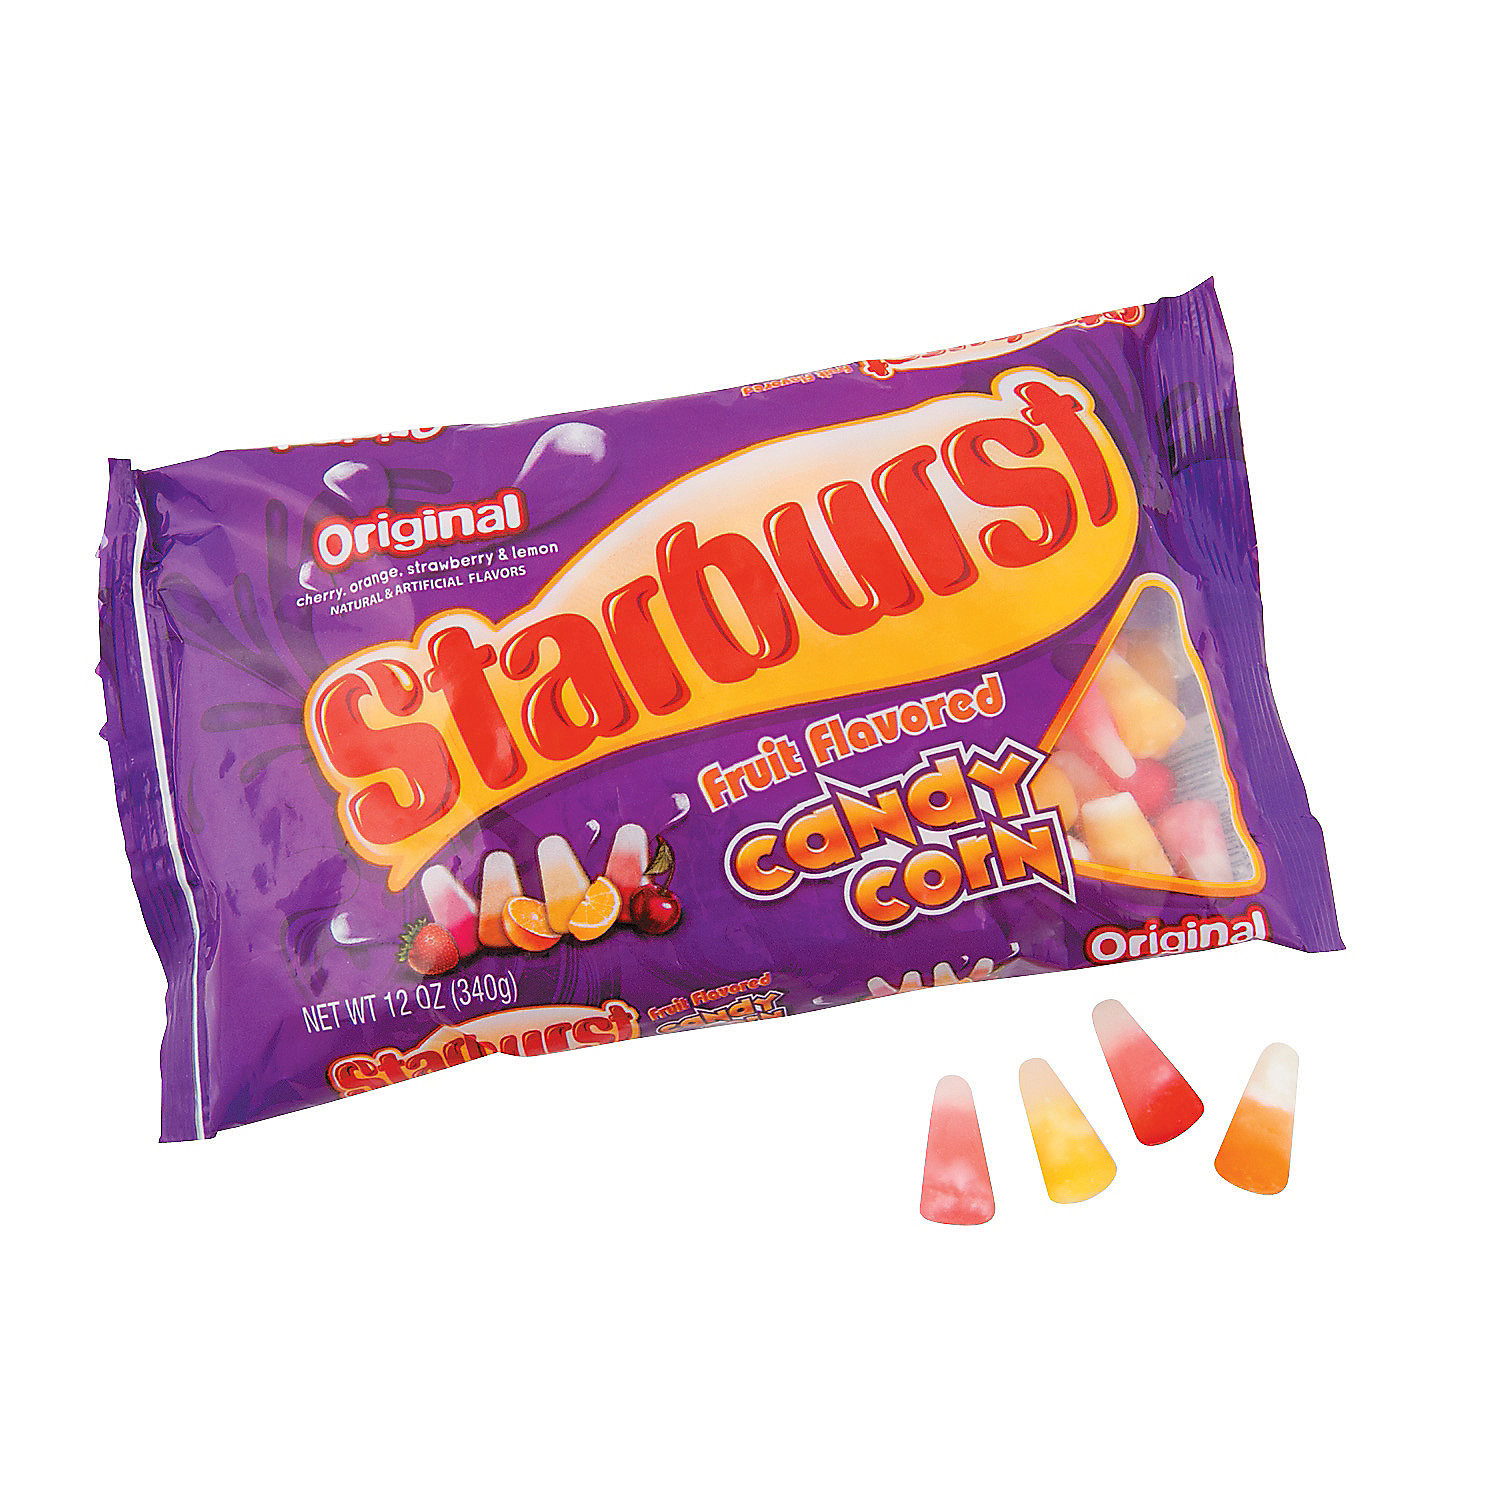 Starburst Candy Corn
 Starburst Candy Corn Soft & Chewy Candy Candy Party